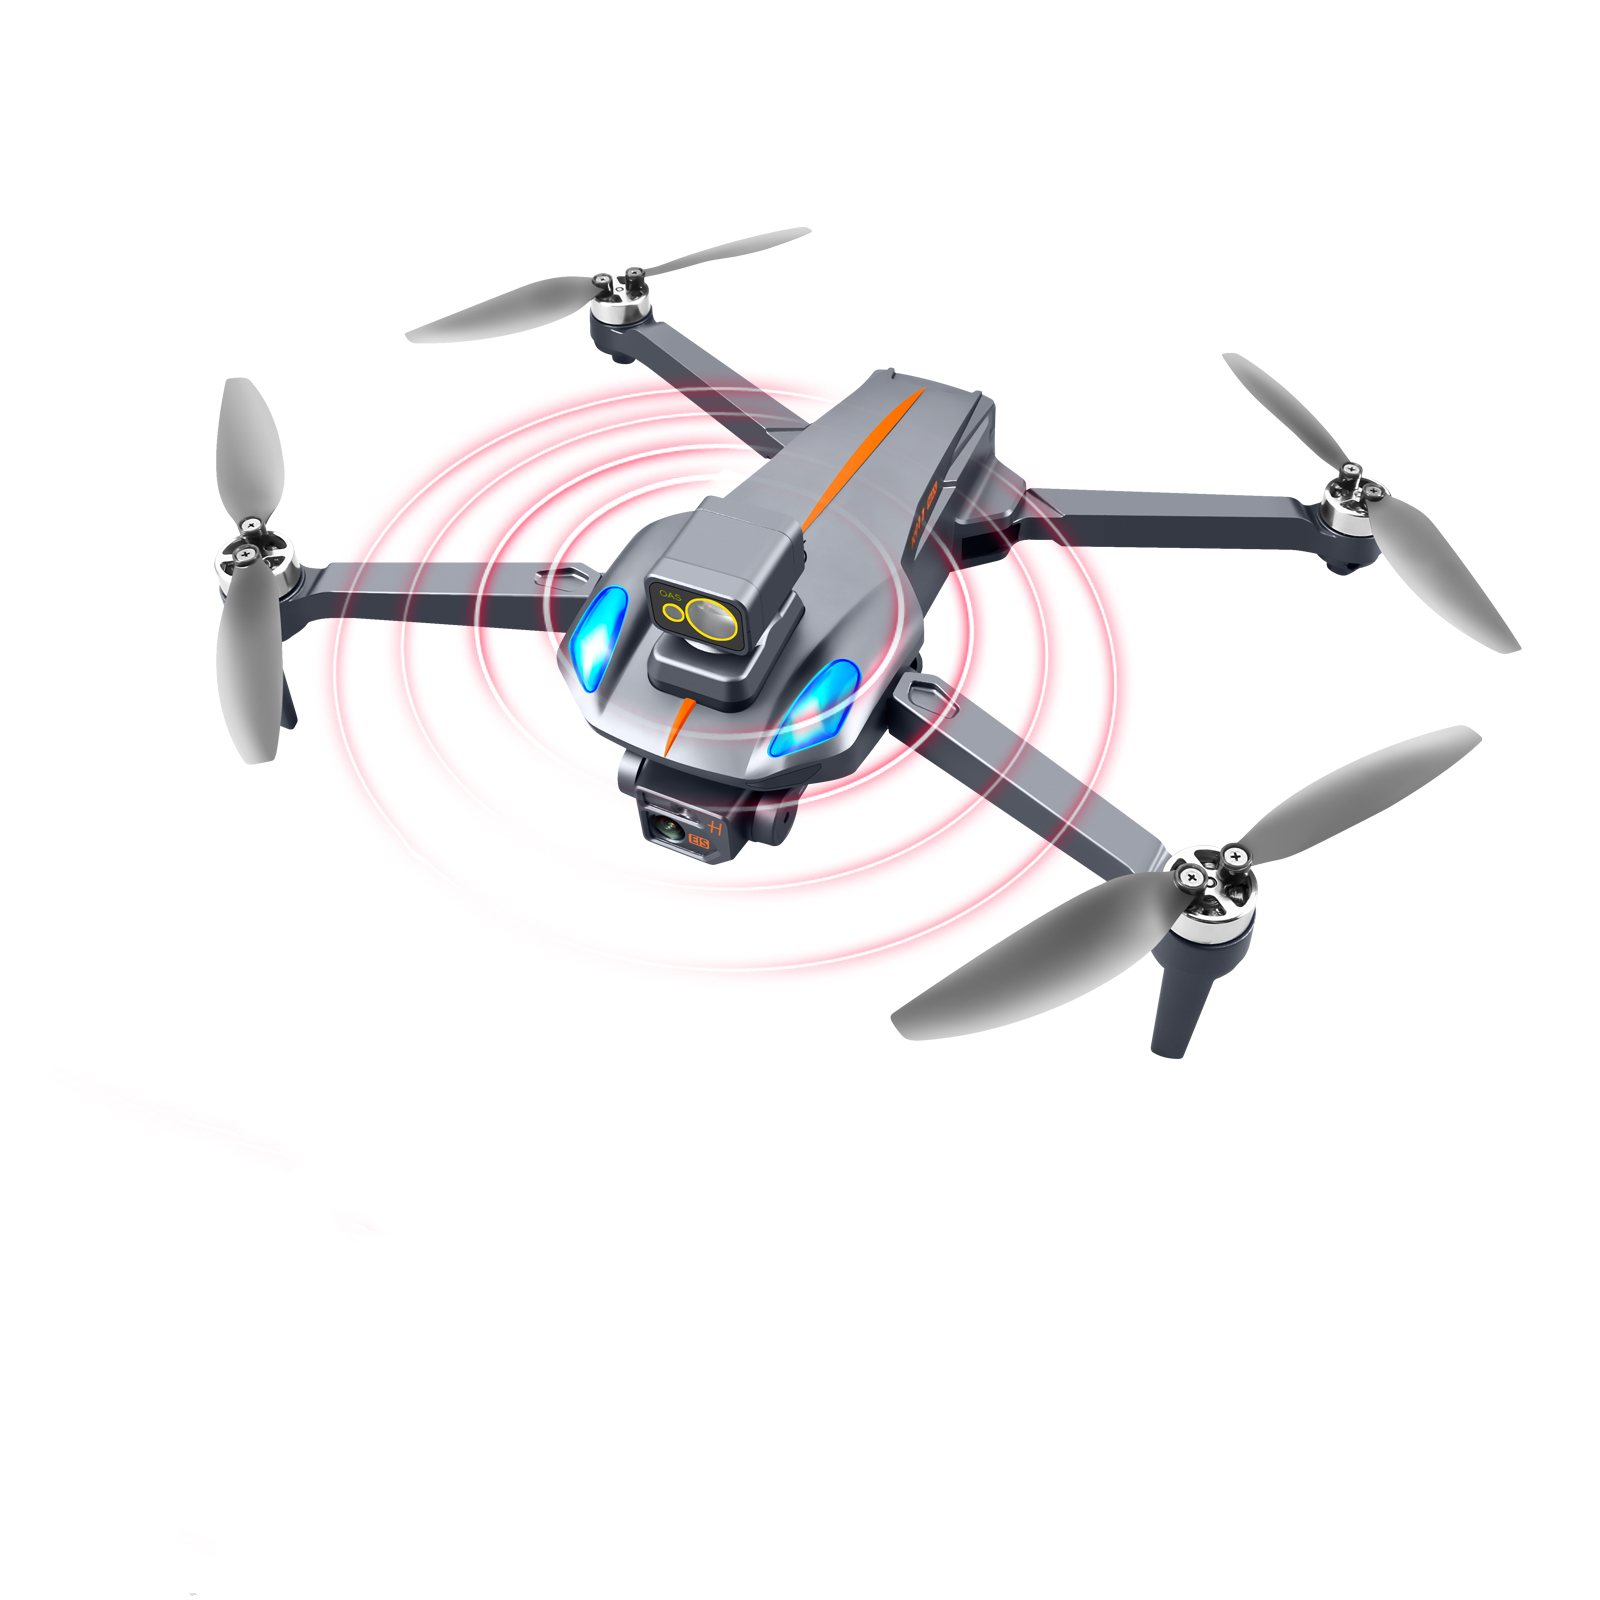 K911 Max 5G WIFI FPV GPS with 8K ESC Dual Camera 360° Obstacle Avoidance Optical Flow Positioning Brushless 225g Foldable RC Drone Quadcopter RTF 4